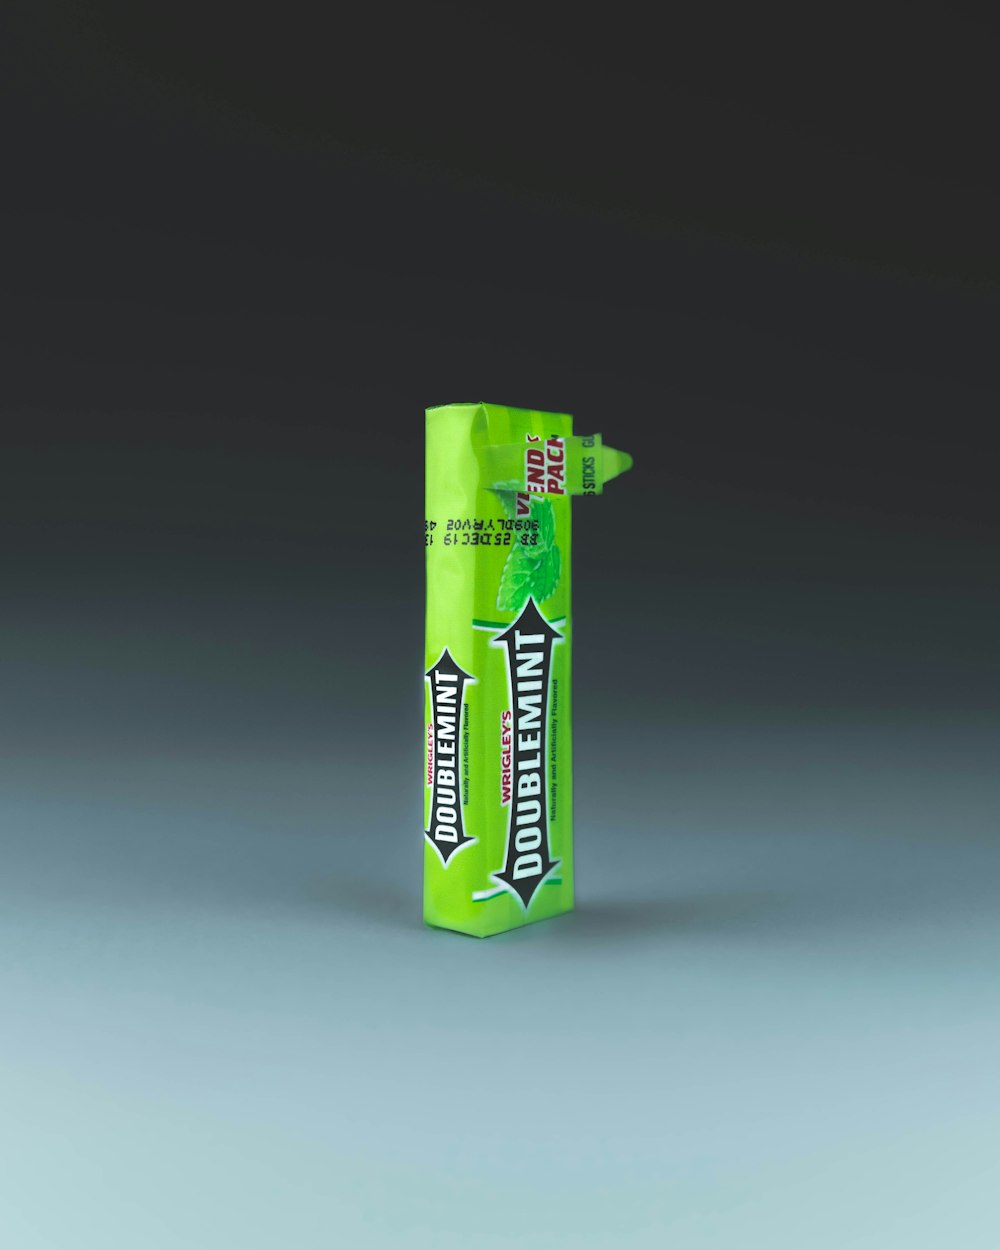 green doublemint candy box